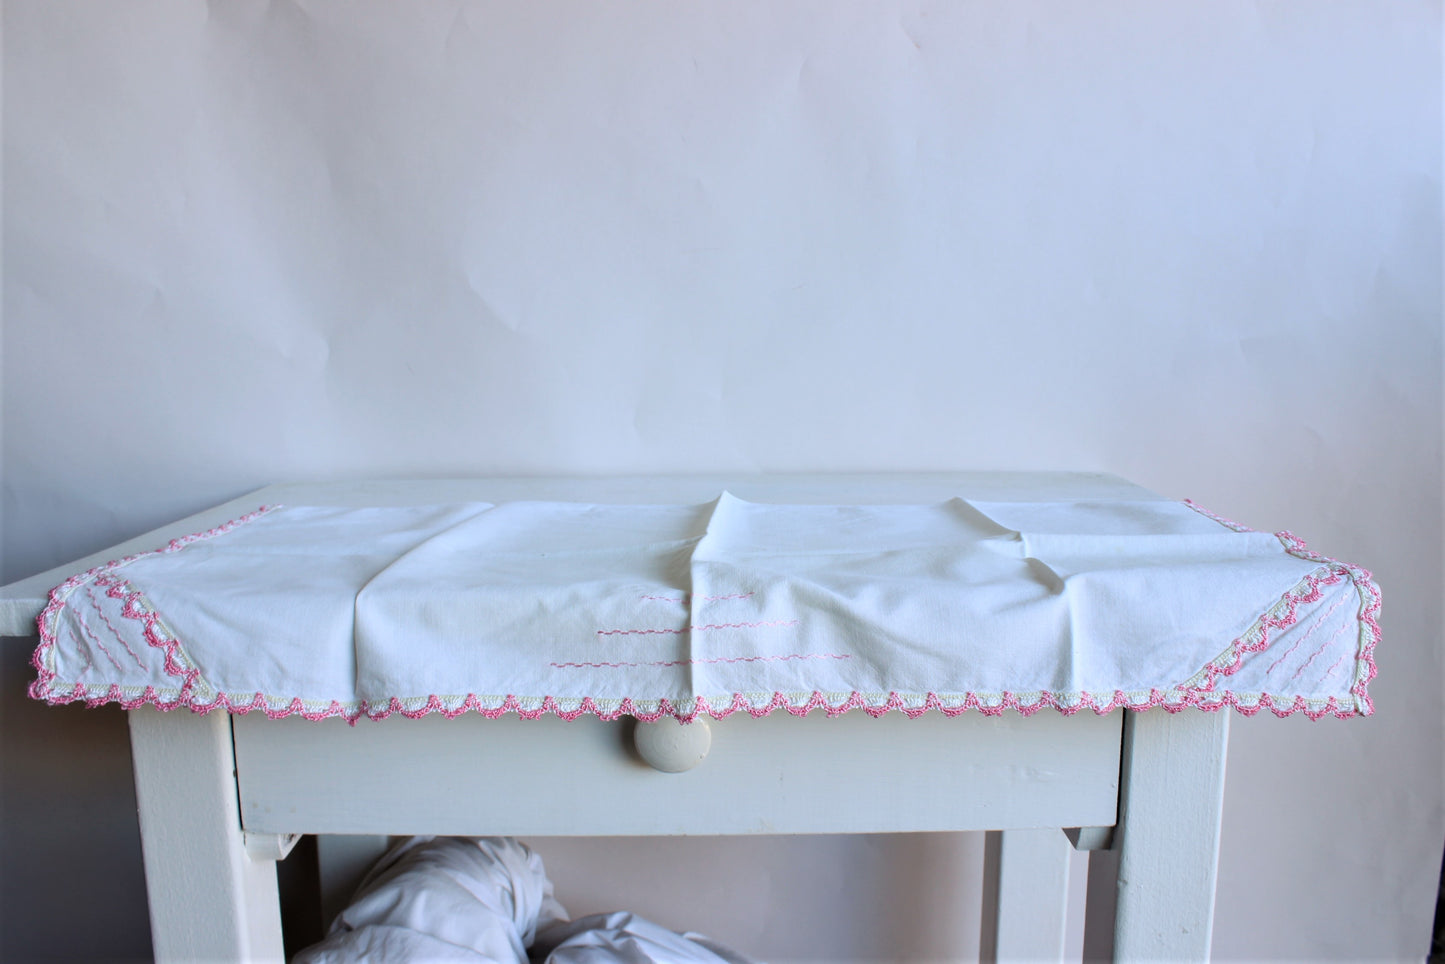 Vintage 1950s Cotton Couch Cover with Pink Lace Trim